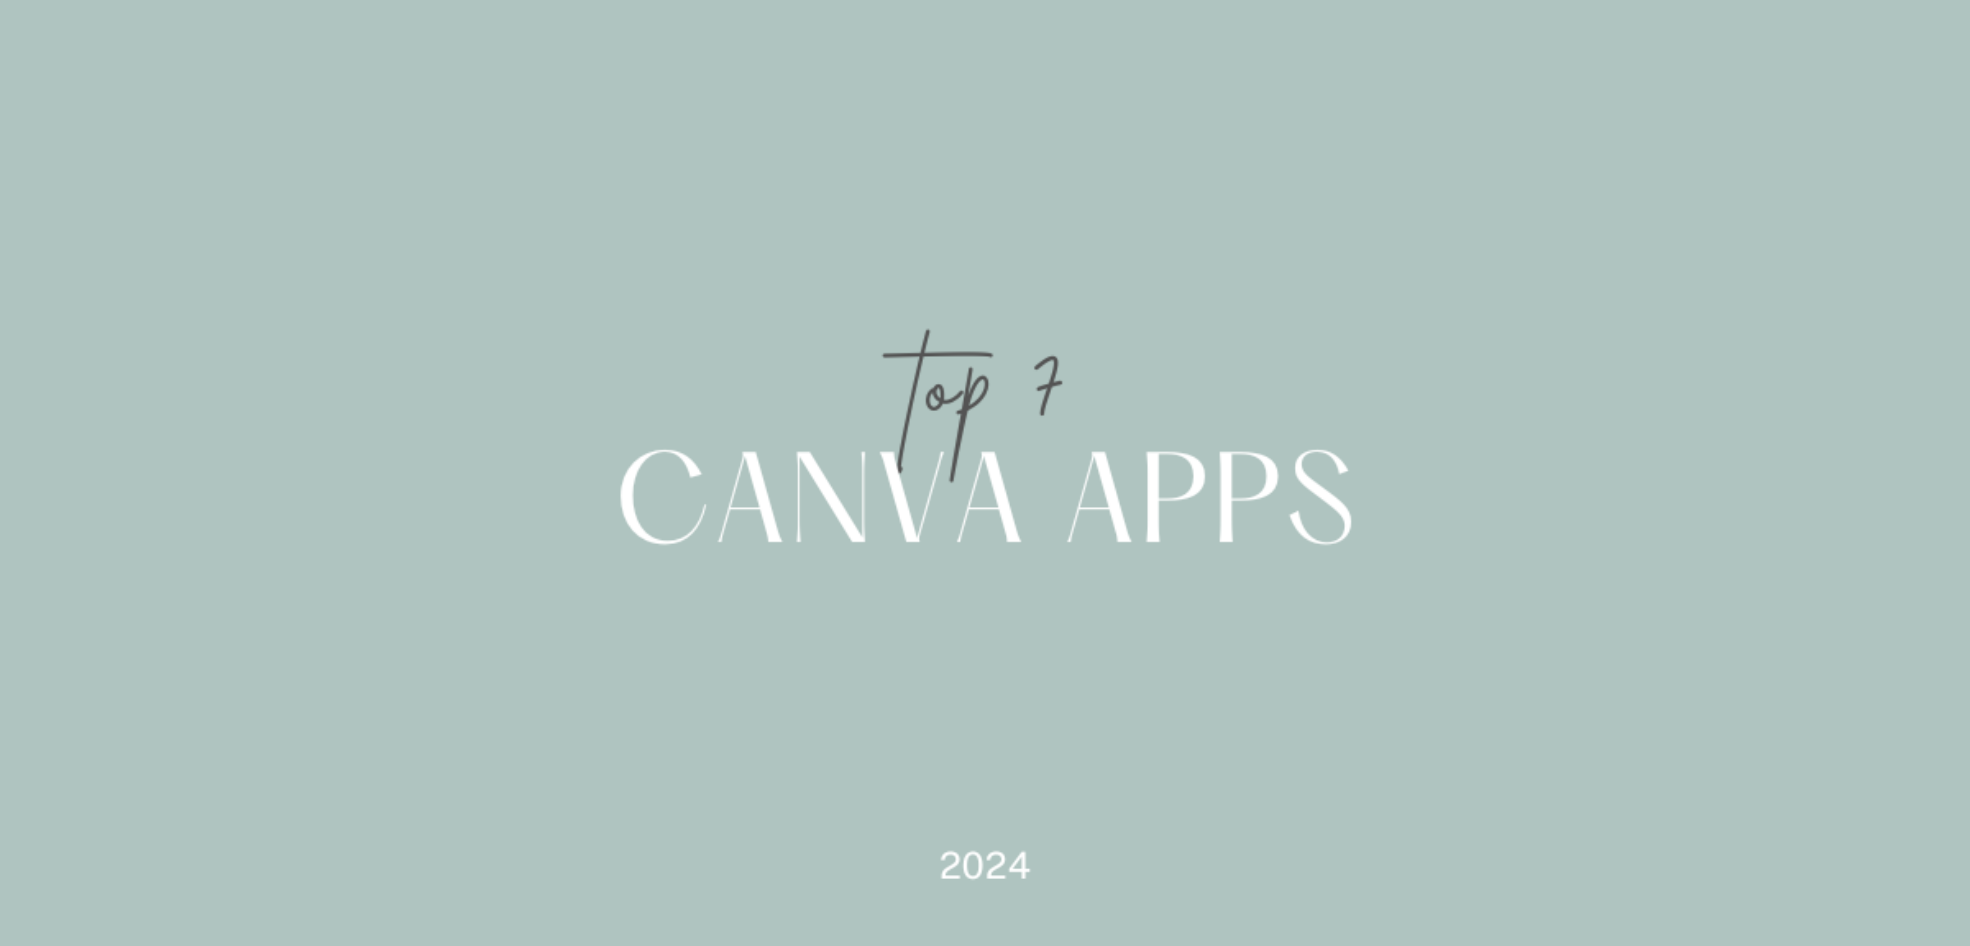 best canva app, best canva apps